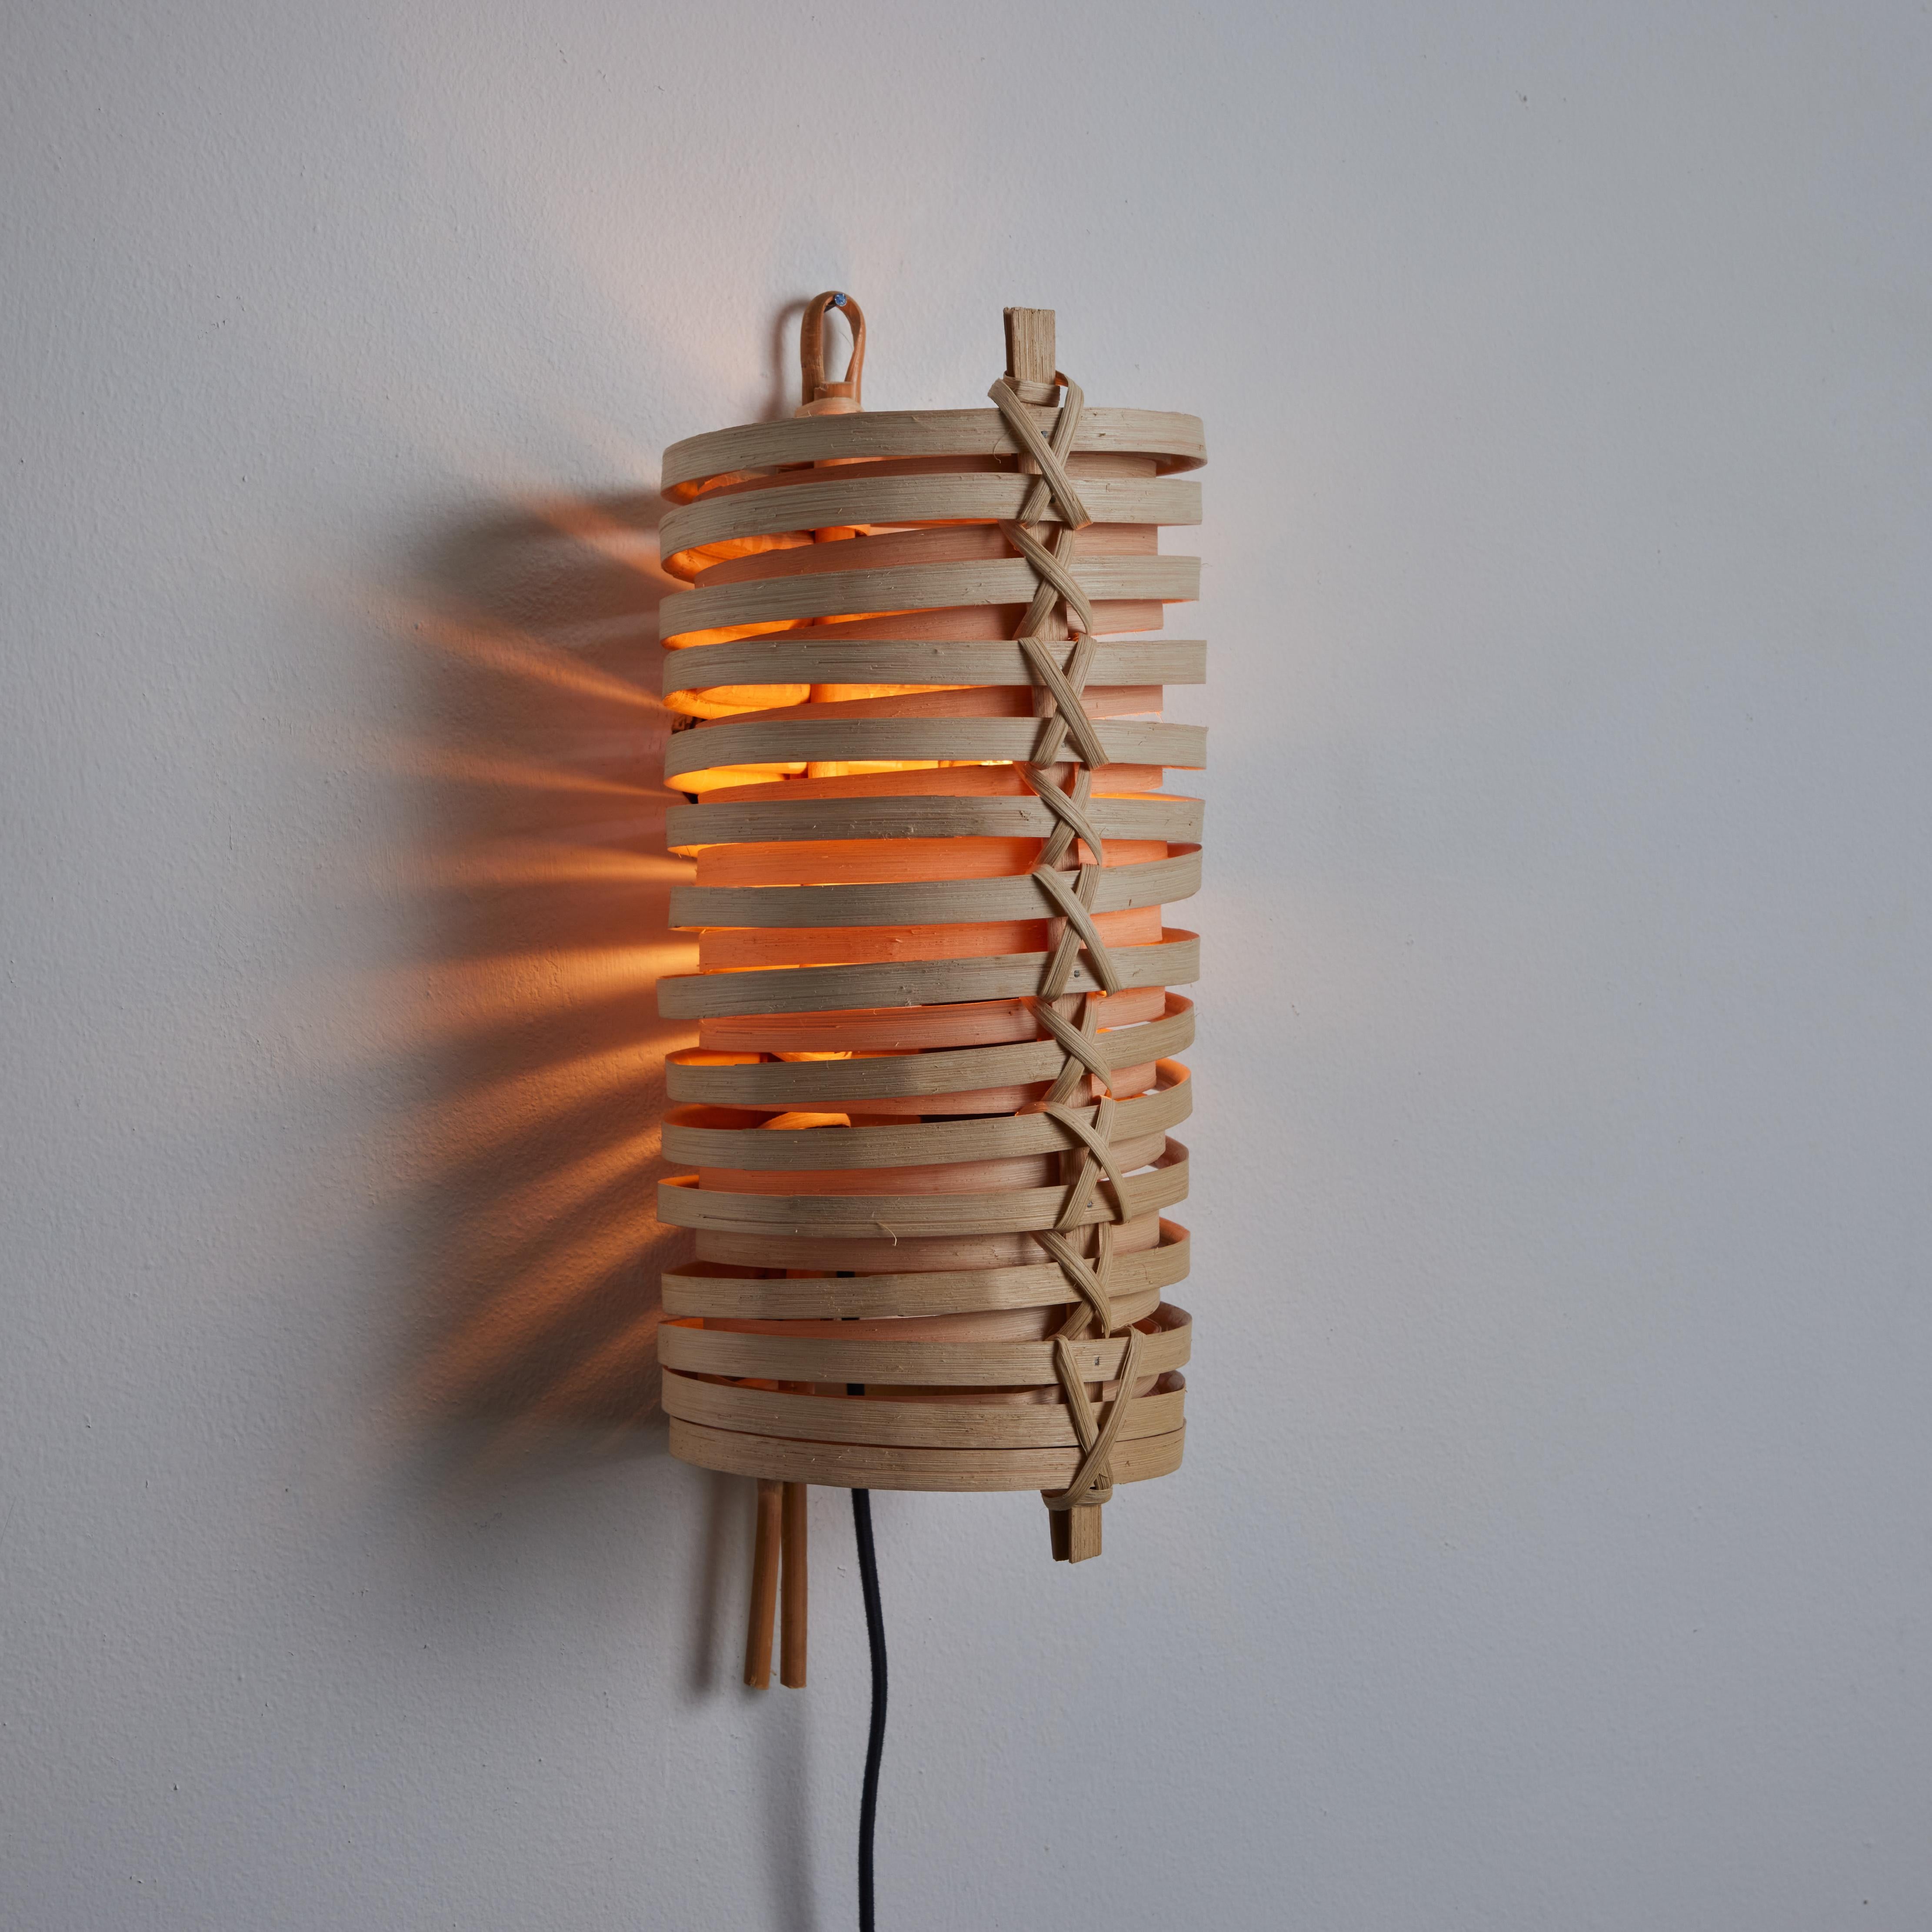 J.A. Coderch 'Junco' Rattan Cane Wall Lamp for Tunds For Sale 4